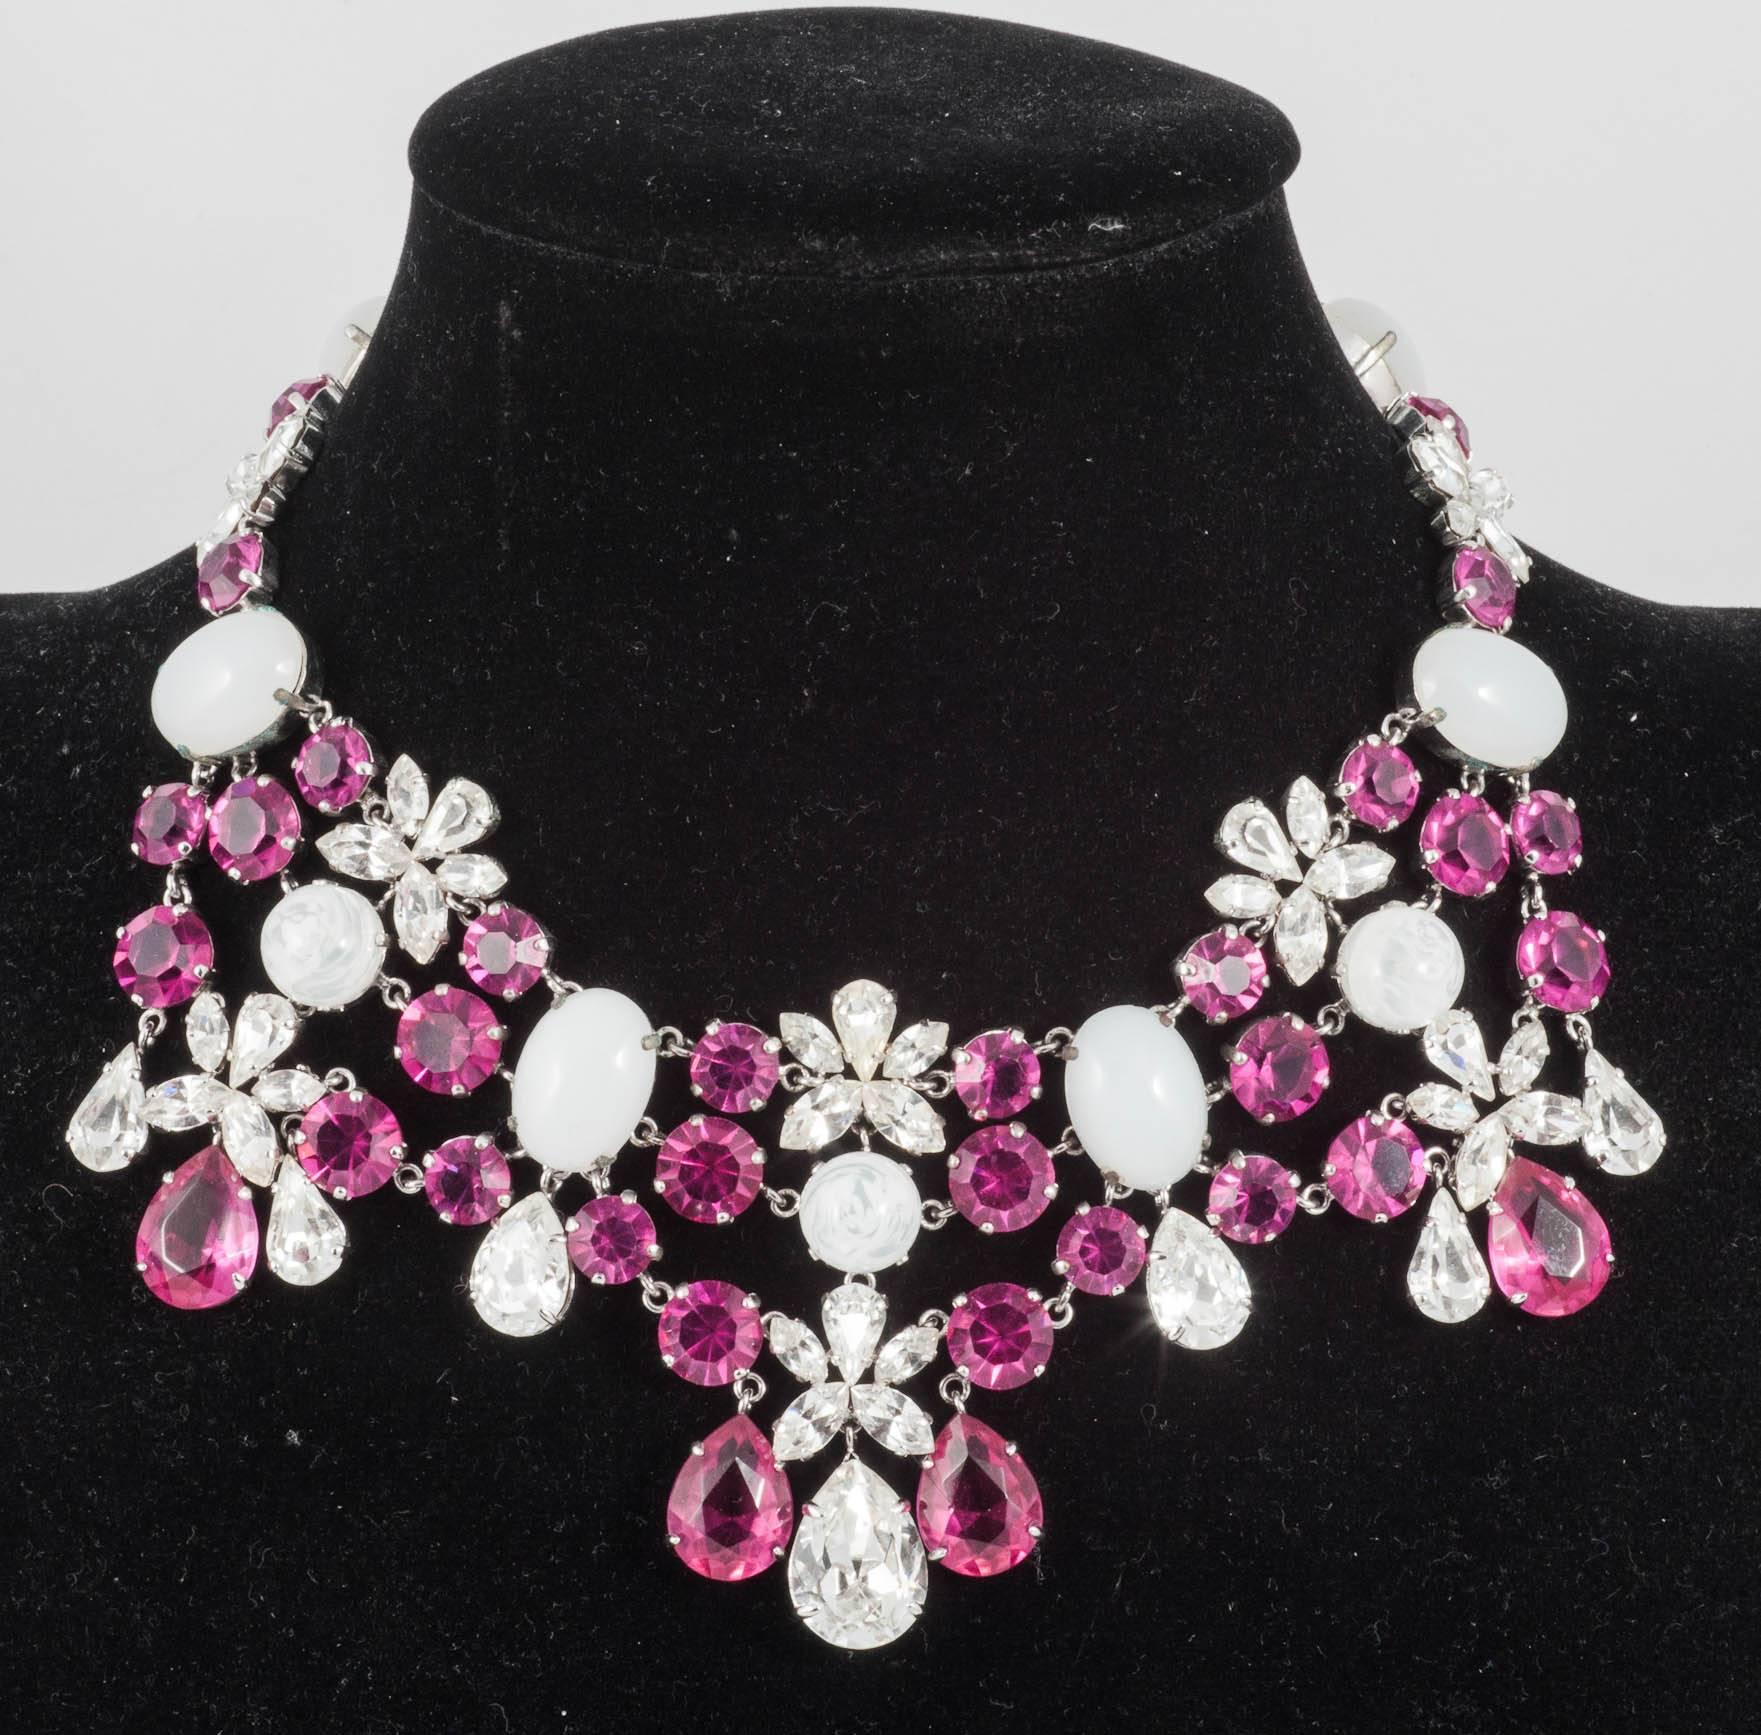 A rare and highly glamorous necklace from Christian Dior, in striking deep fuschia pink and milky moonstone cabuchons, including trademark 'swirled' button stones of this period, and paste highlights. This is a design by Francis Winter, Dior's head